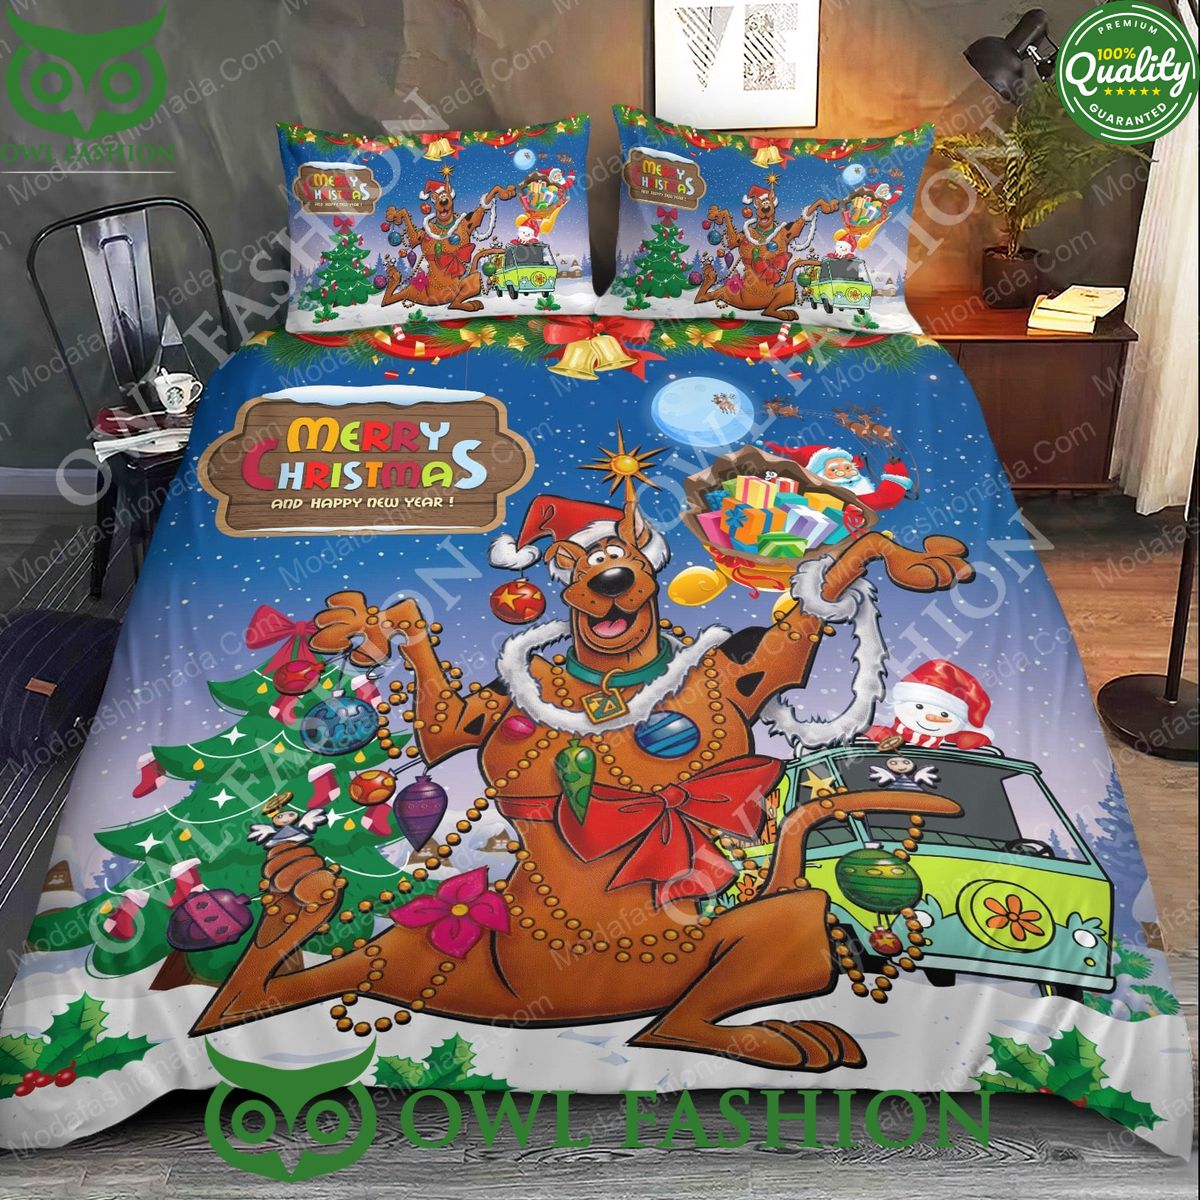 scooby doo merry christmas limited bedding set 2 eOuKE.jpg